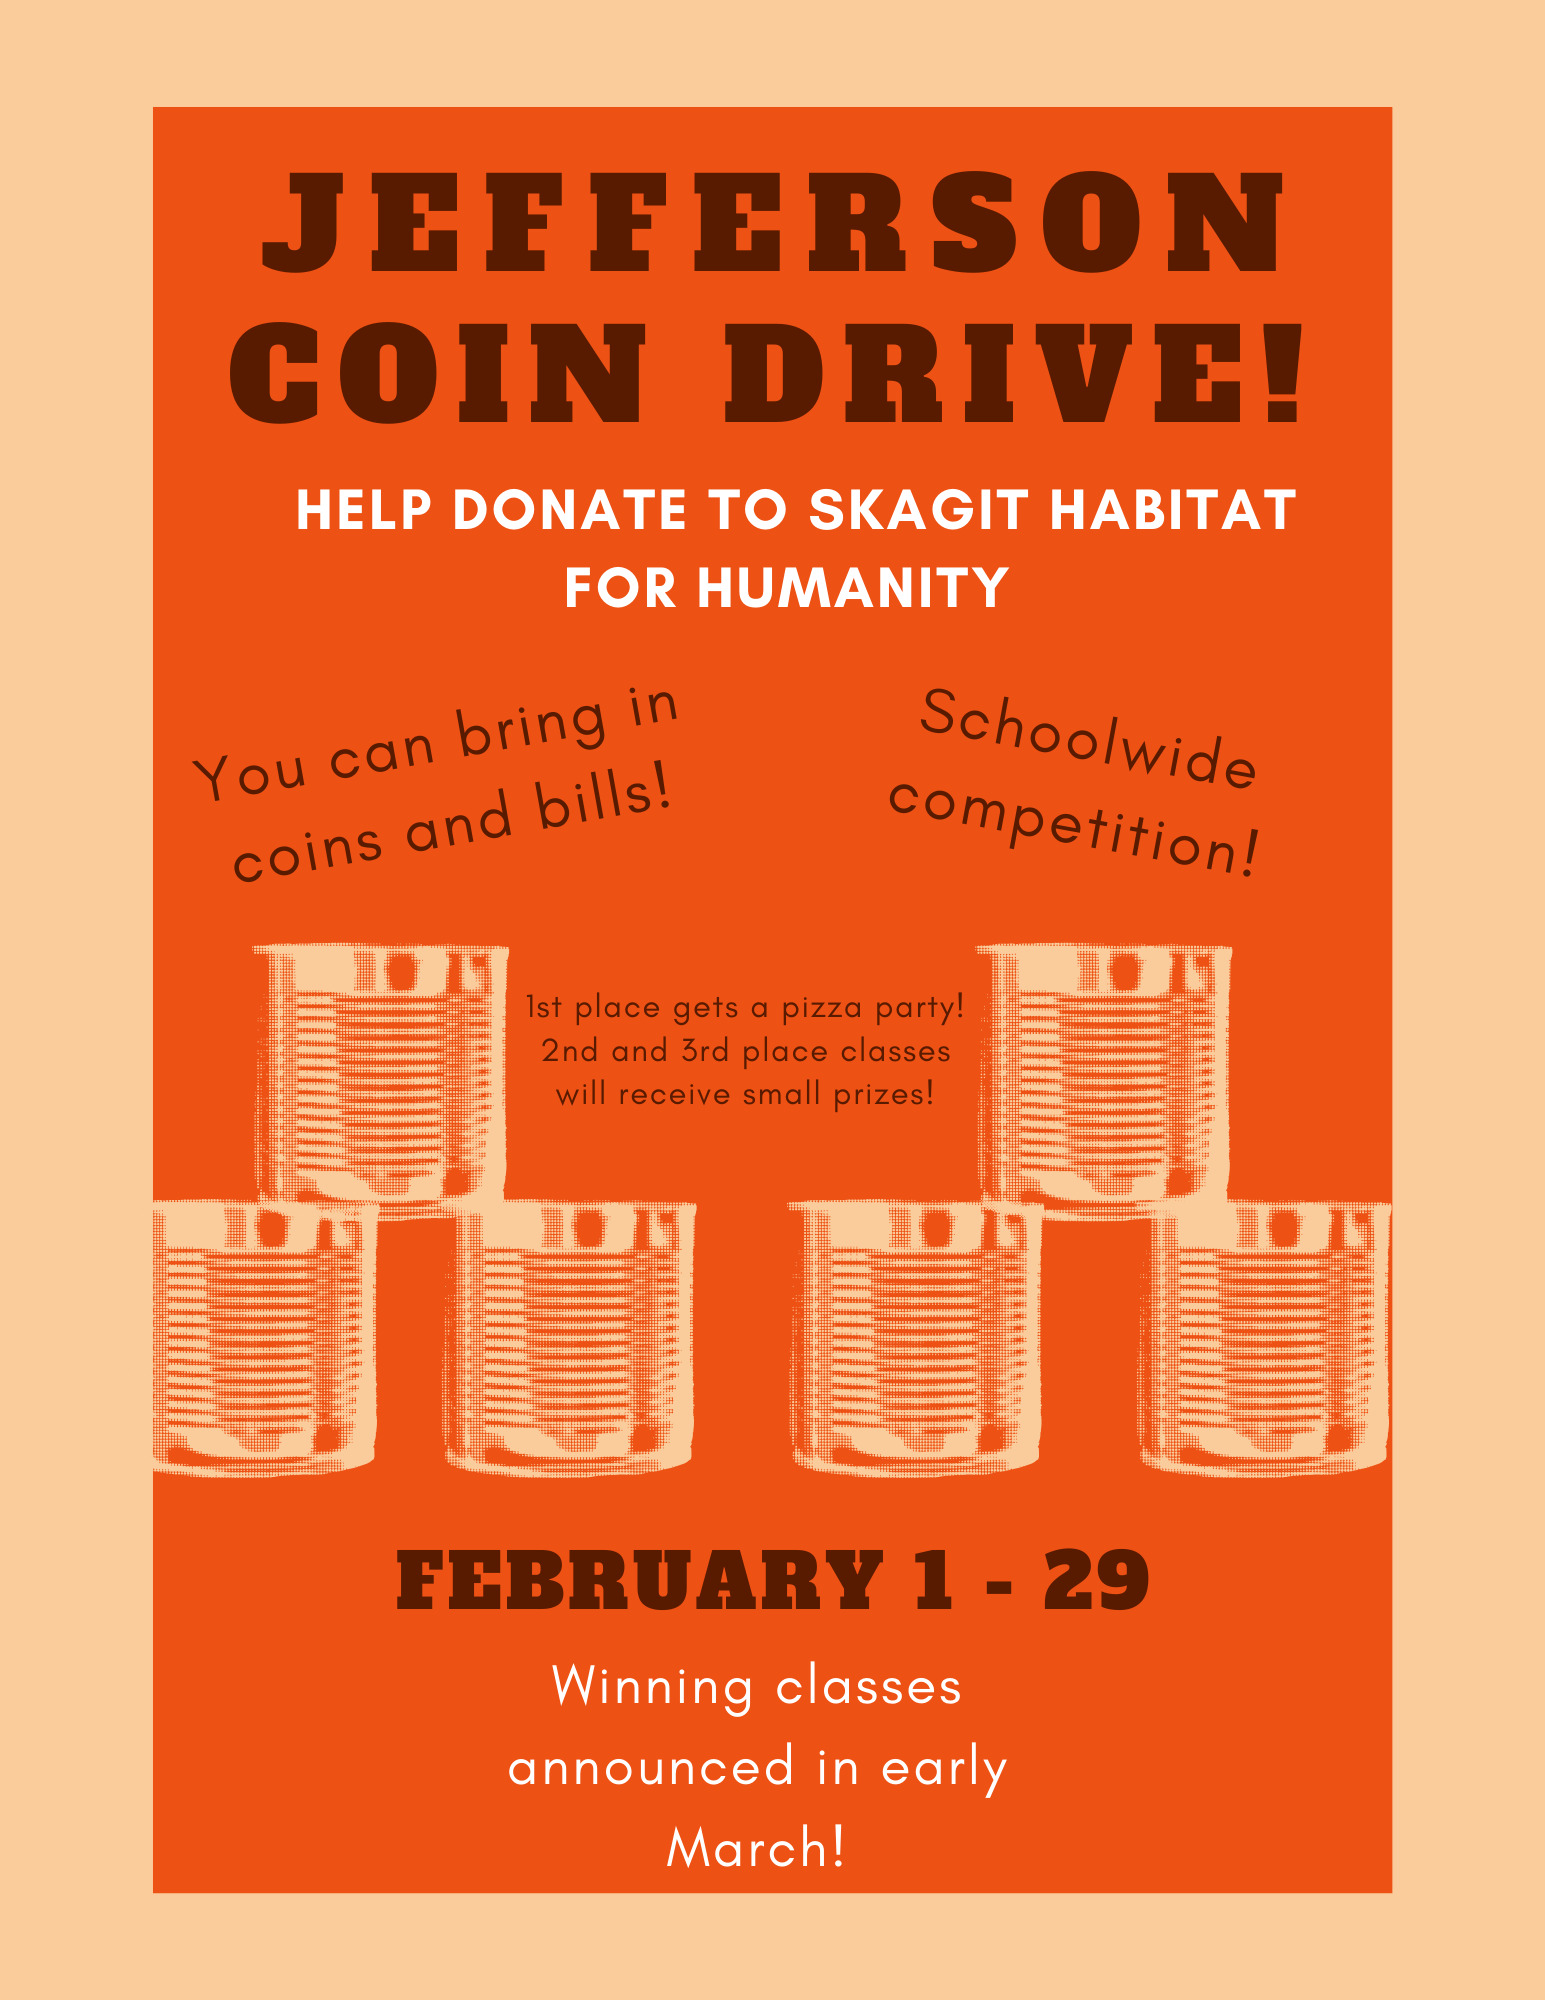 Flyer in English announcing Jefferson Coin Drive for the month of February to raise funds for Skagit Habitat for Humanity.